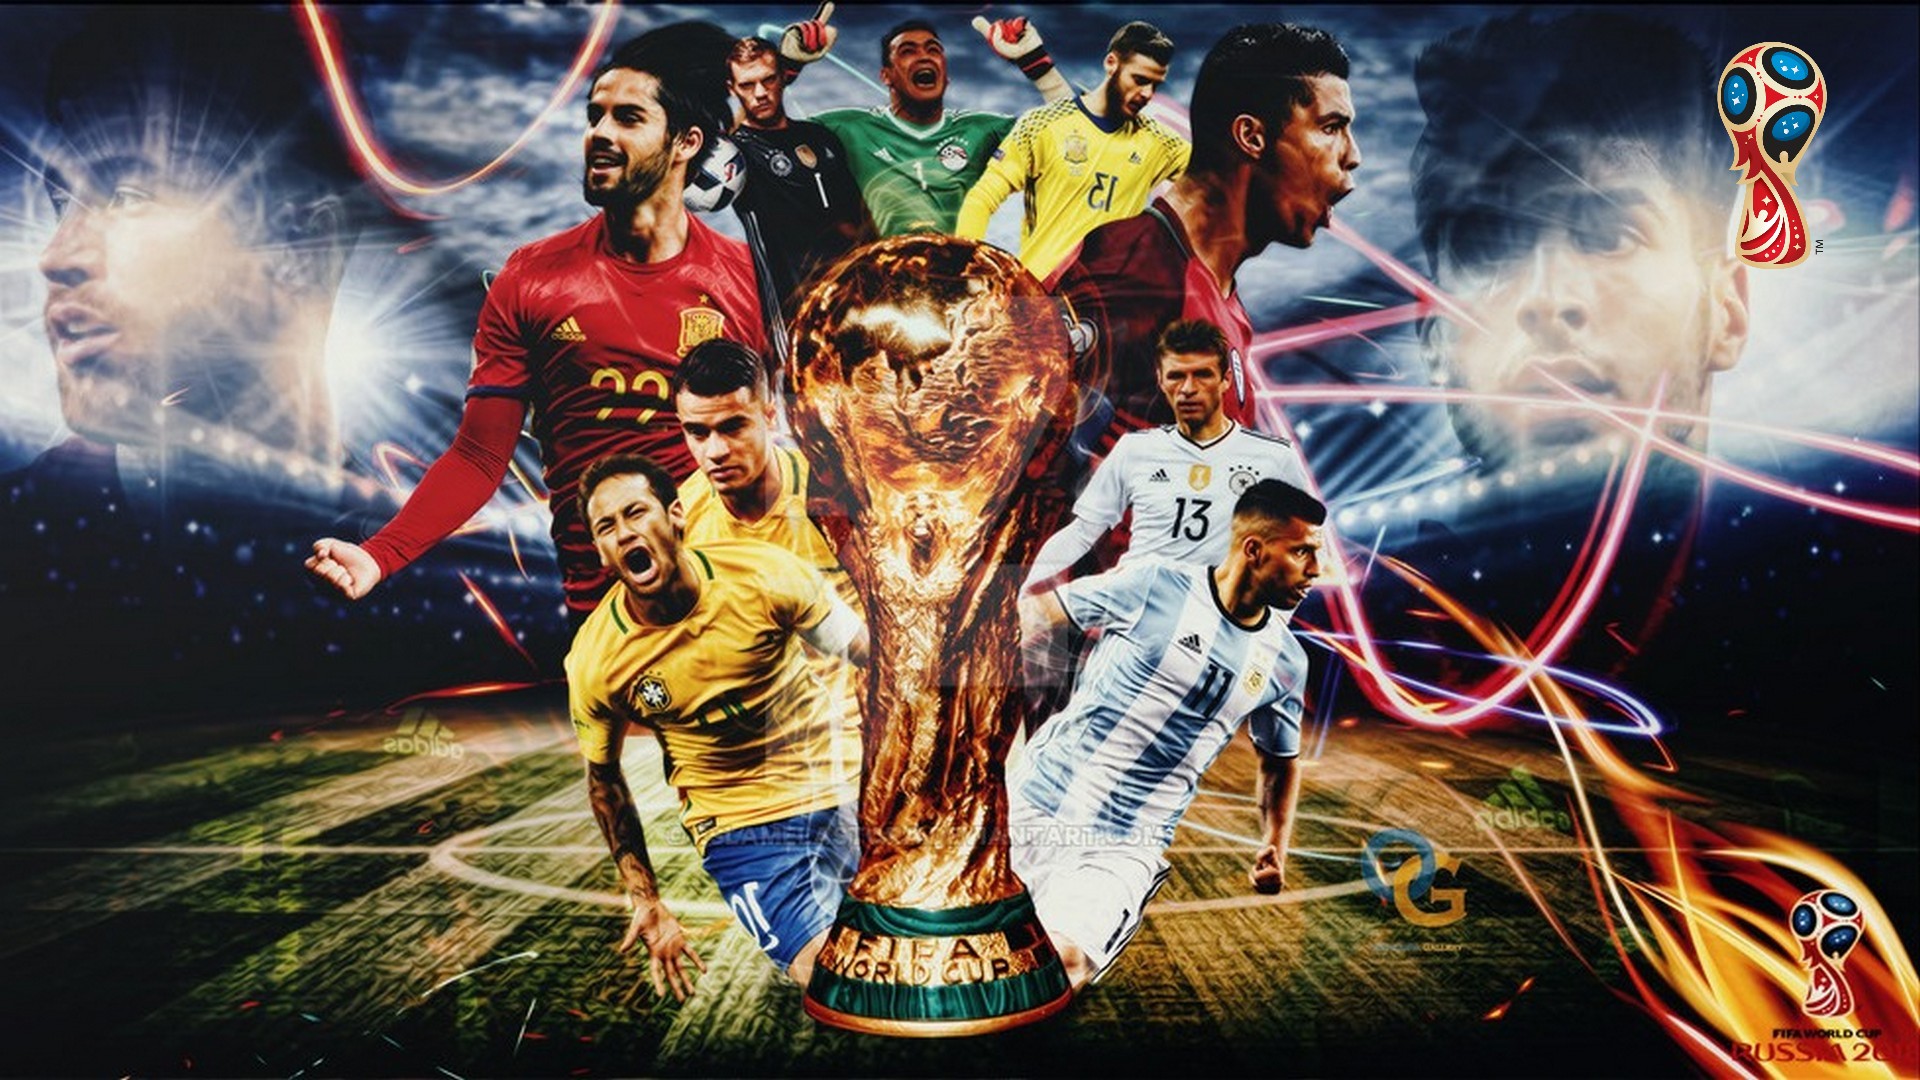 World Cup Russia HD Wallpapers With Resolution 1920X1080 pixel. You can make this wallpaper for your Mac or Windows Desktop Background, iPhone, Android or Tablet and another Smartphone device for free